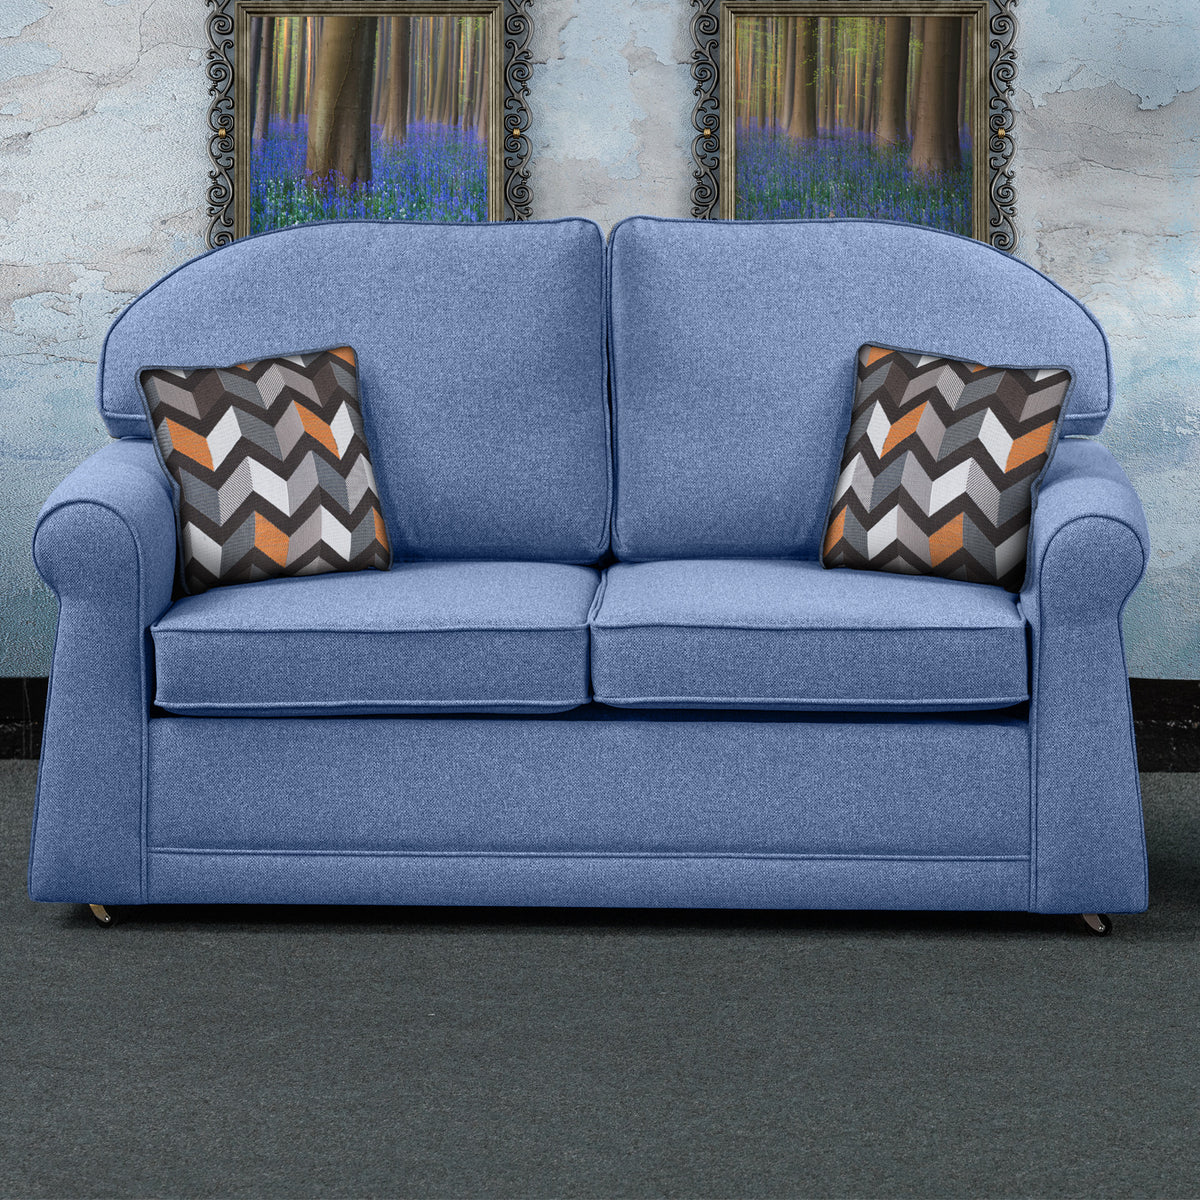 Croxdon Denim Faux Linen 2 Seater Sofabed with Charcoal Scatter Cushions from Roseland Furniture